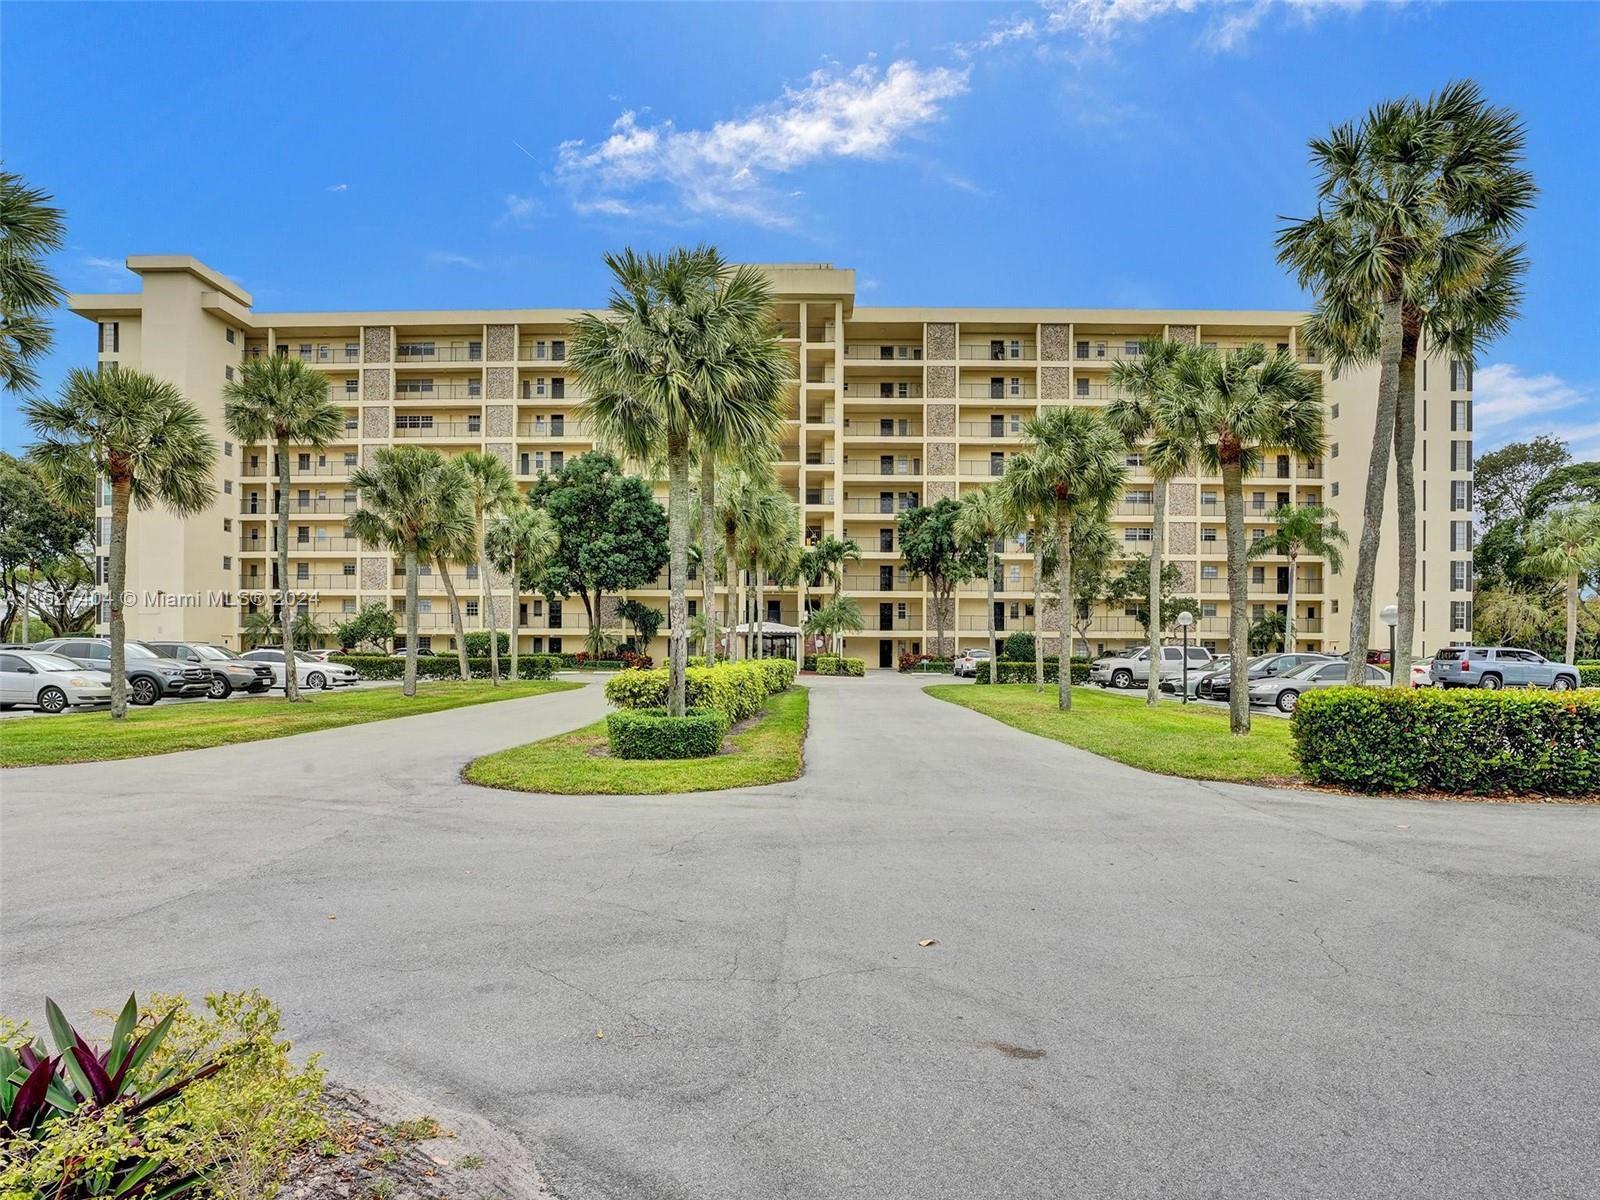 Photo of 3050 N Palm Aire Dr #708 in Pompano Beach, FL